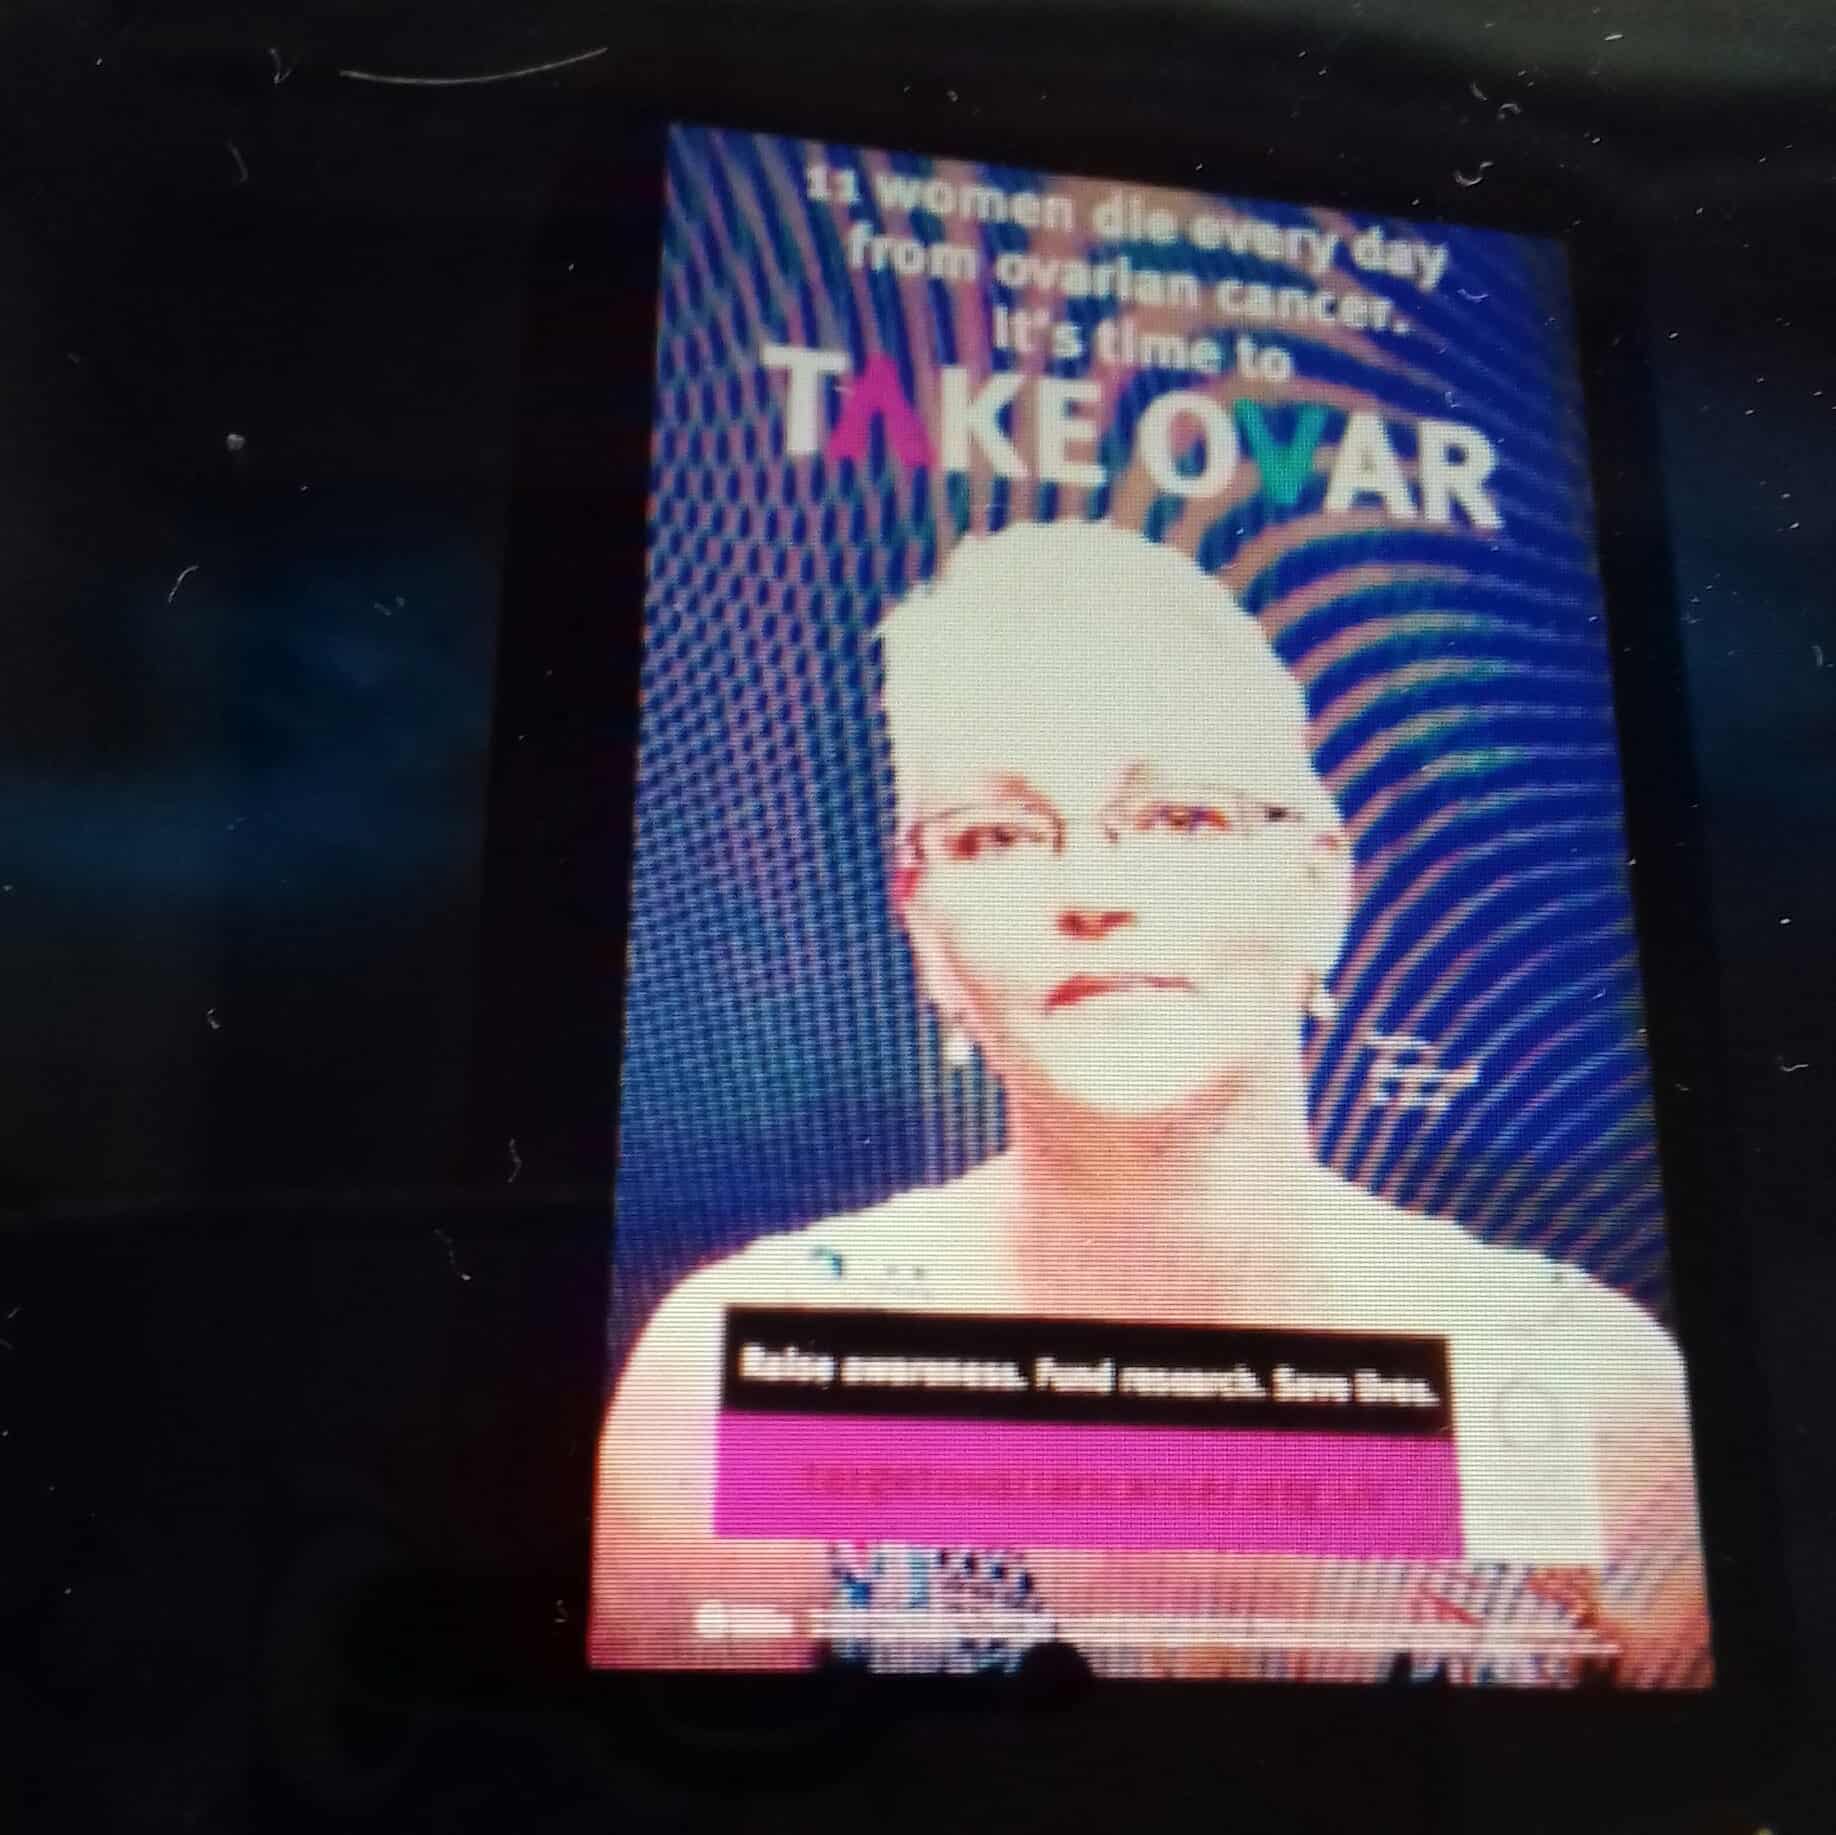 A photo of a Target Ovarian Cancer digital billboard which includes a picture of Helen. The billboard reads '11 women die every day from ovarian cancer. It's time to take ovar.